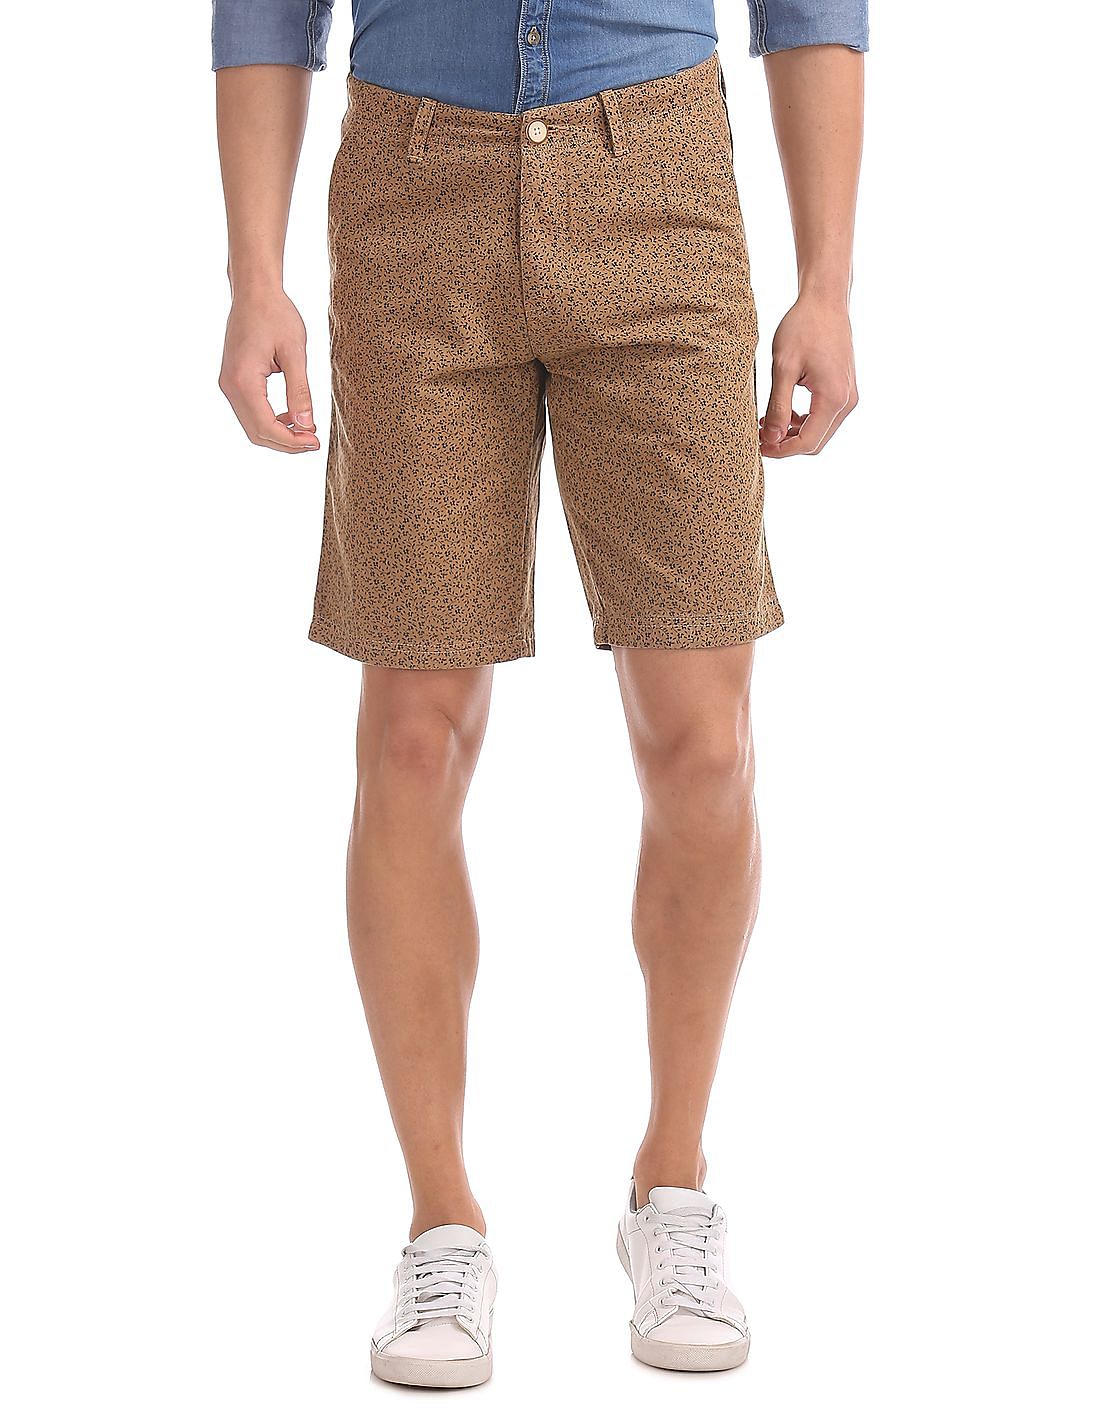 Buy Men Printed Cotton Twill Shorts online at NNNOW.com